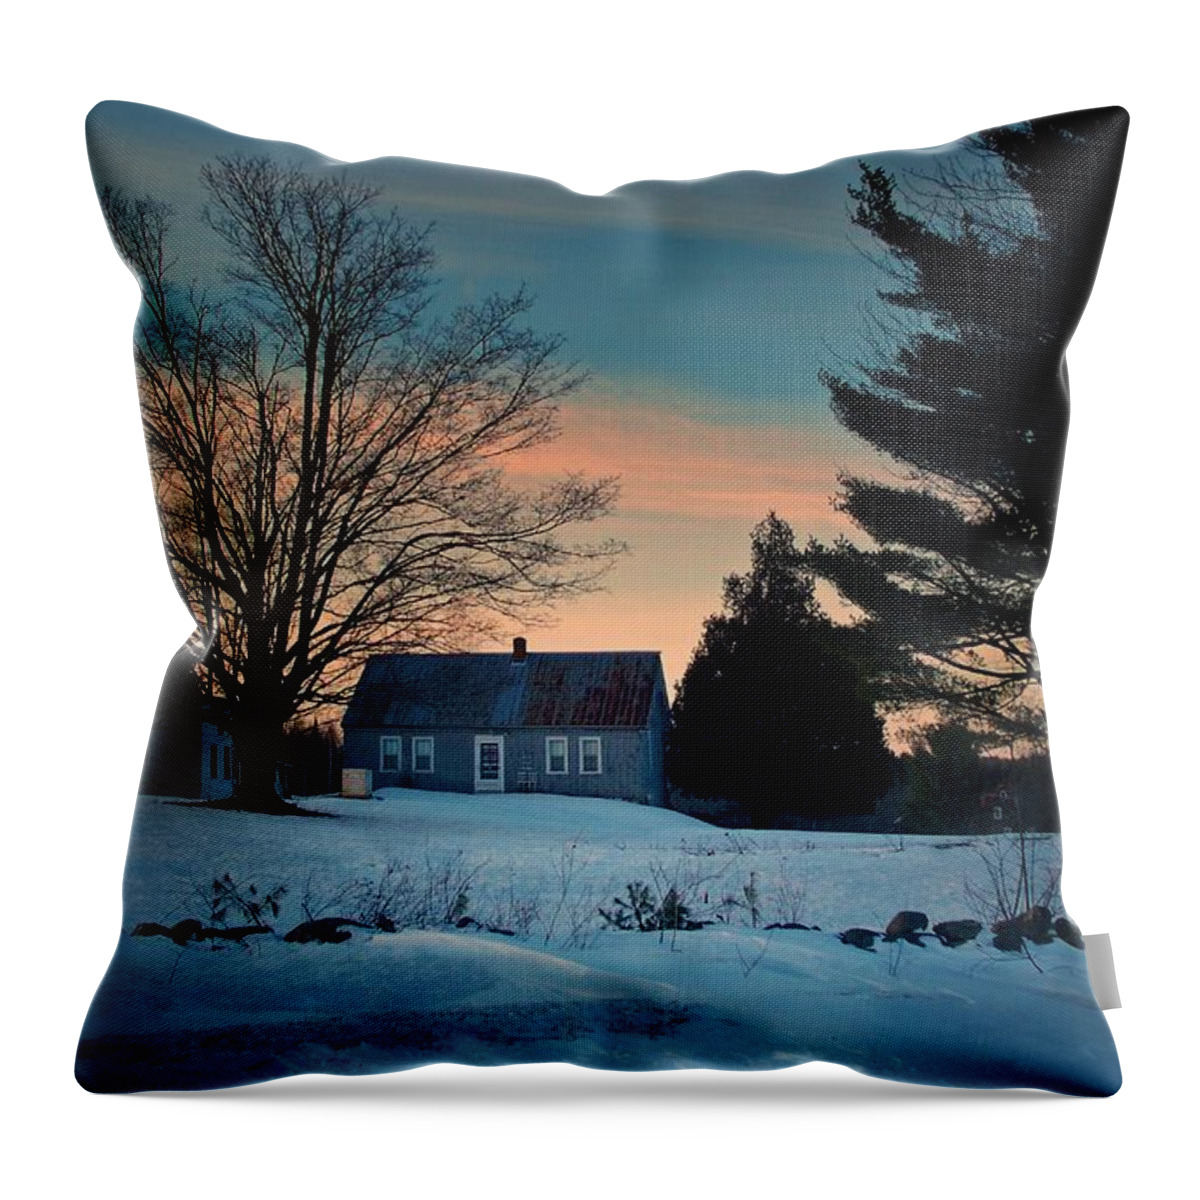 Photography Throw Pillow featuring the photograph Countryside Winter Evening by Joy Nichols